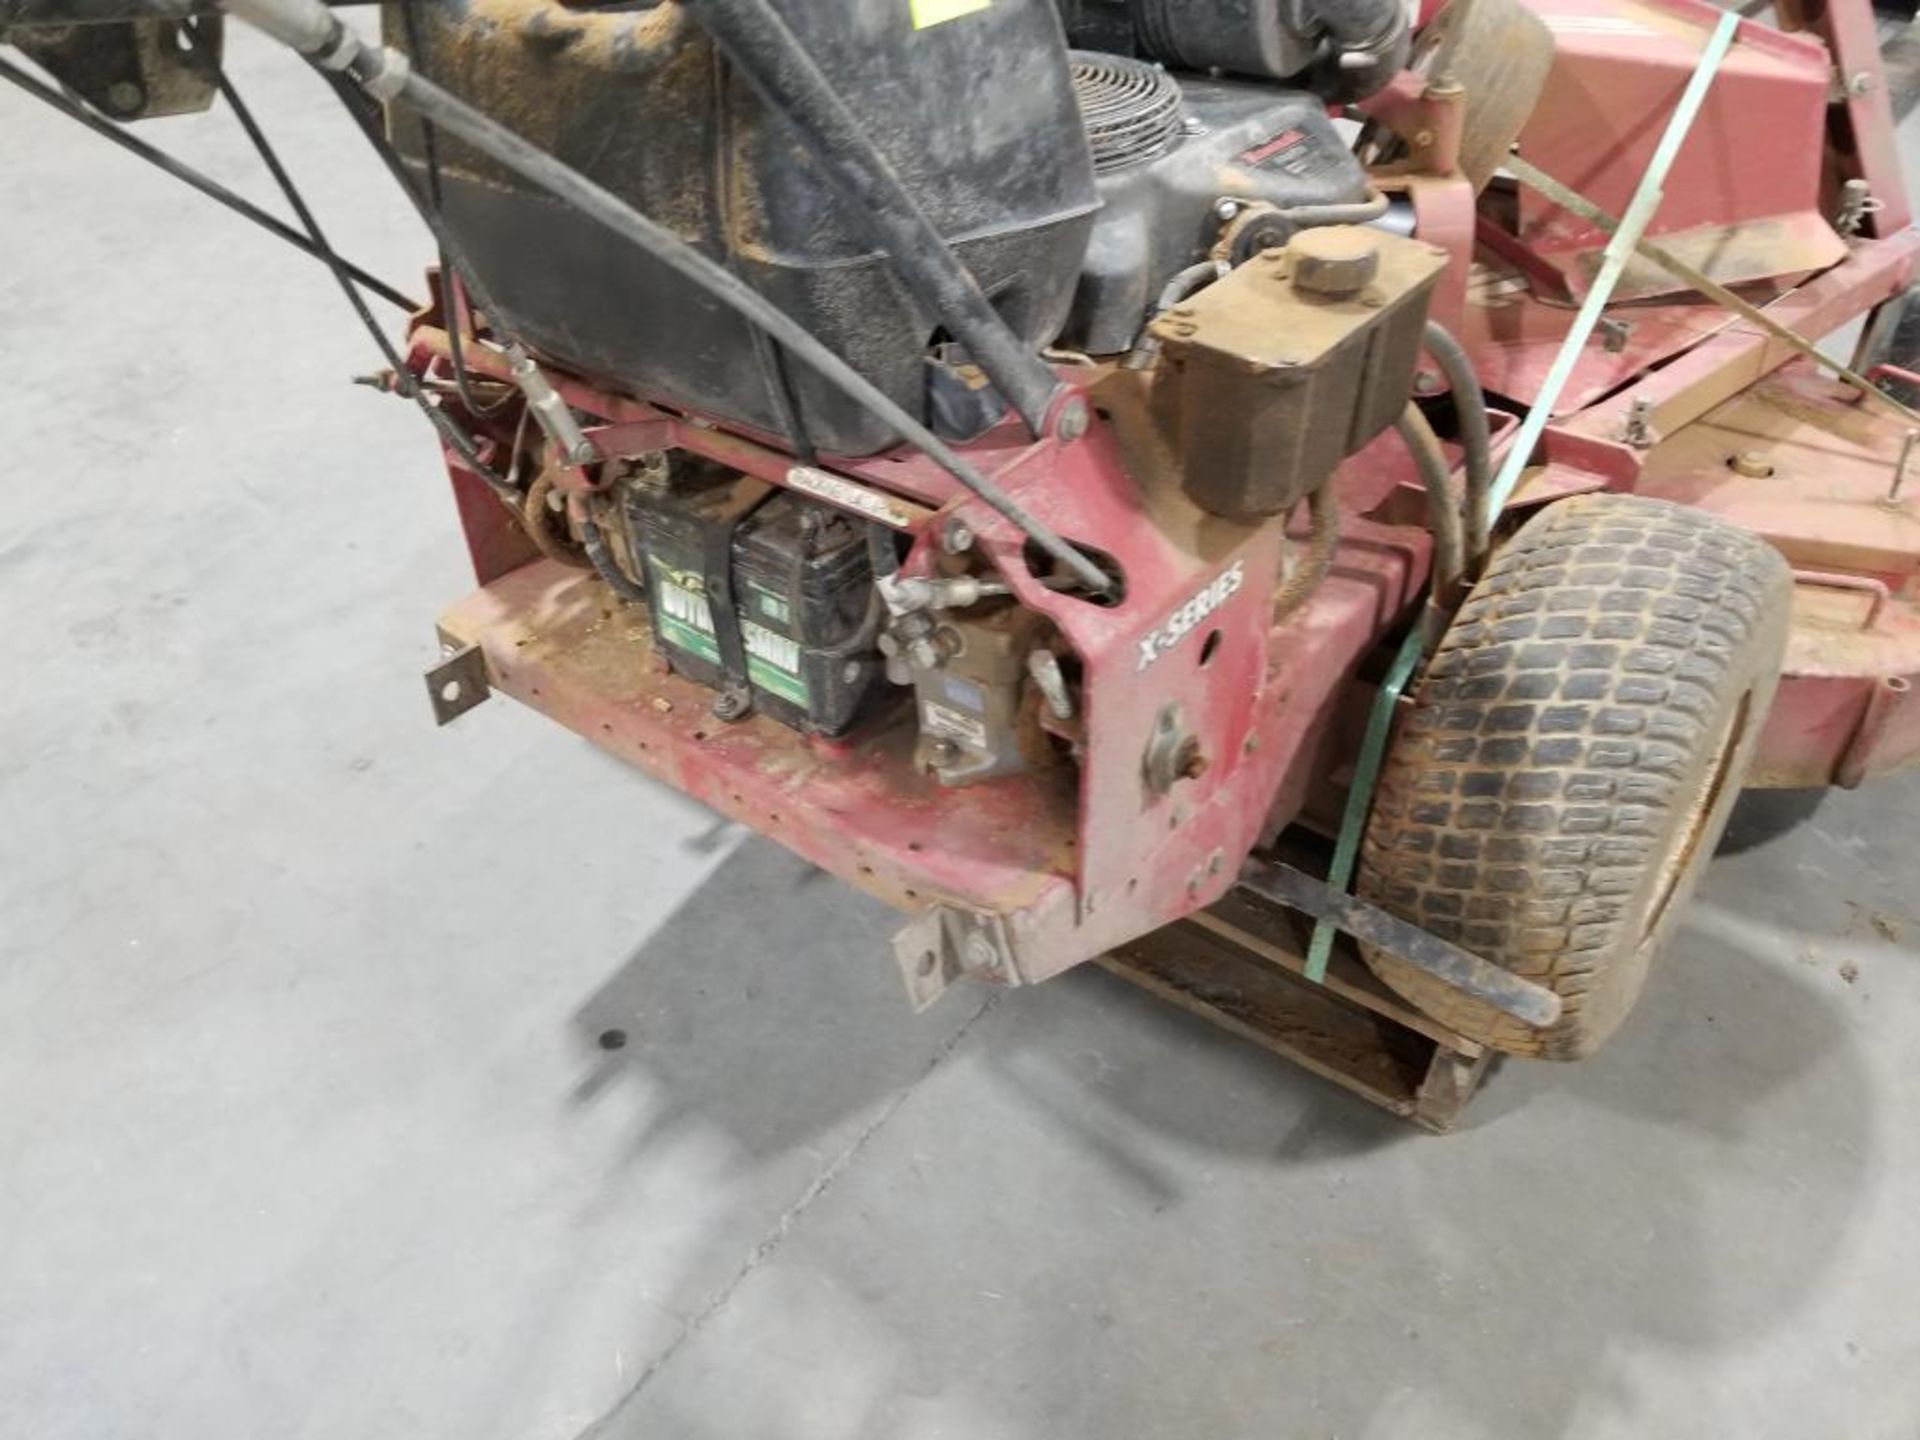 60in Exmark walk behind mower. Kawasaki 22hp engine. Working condition unknown. Battery is dead. - Image 7 of 20